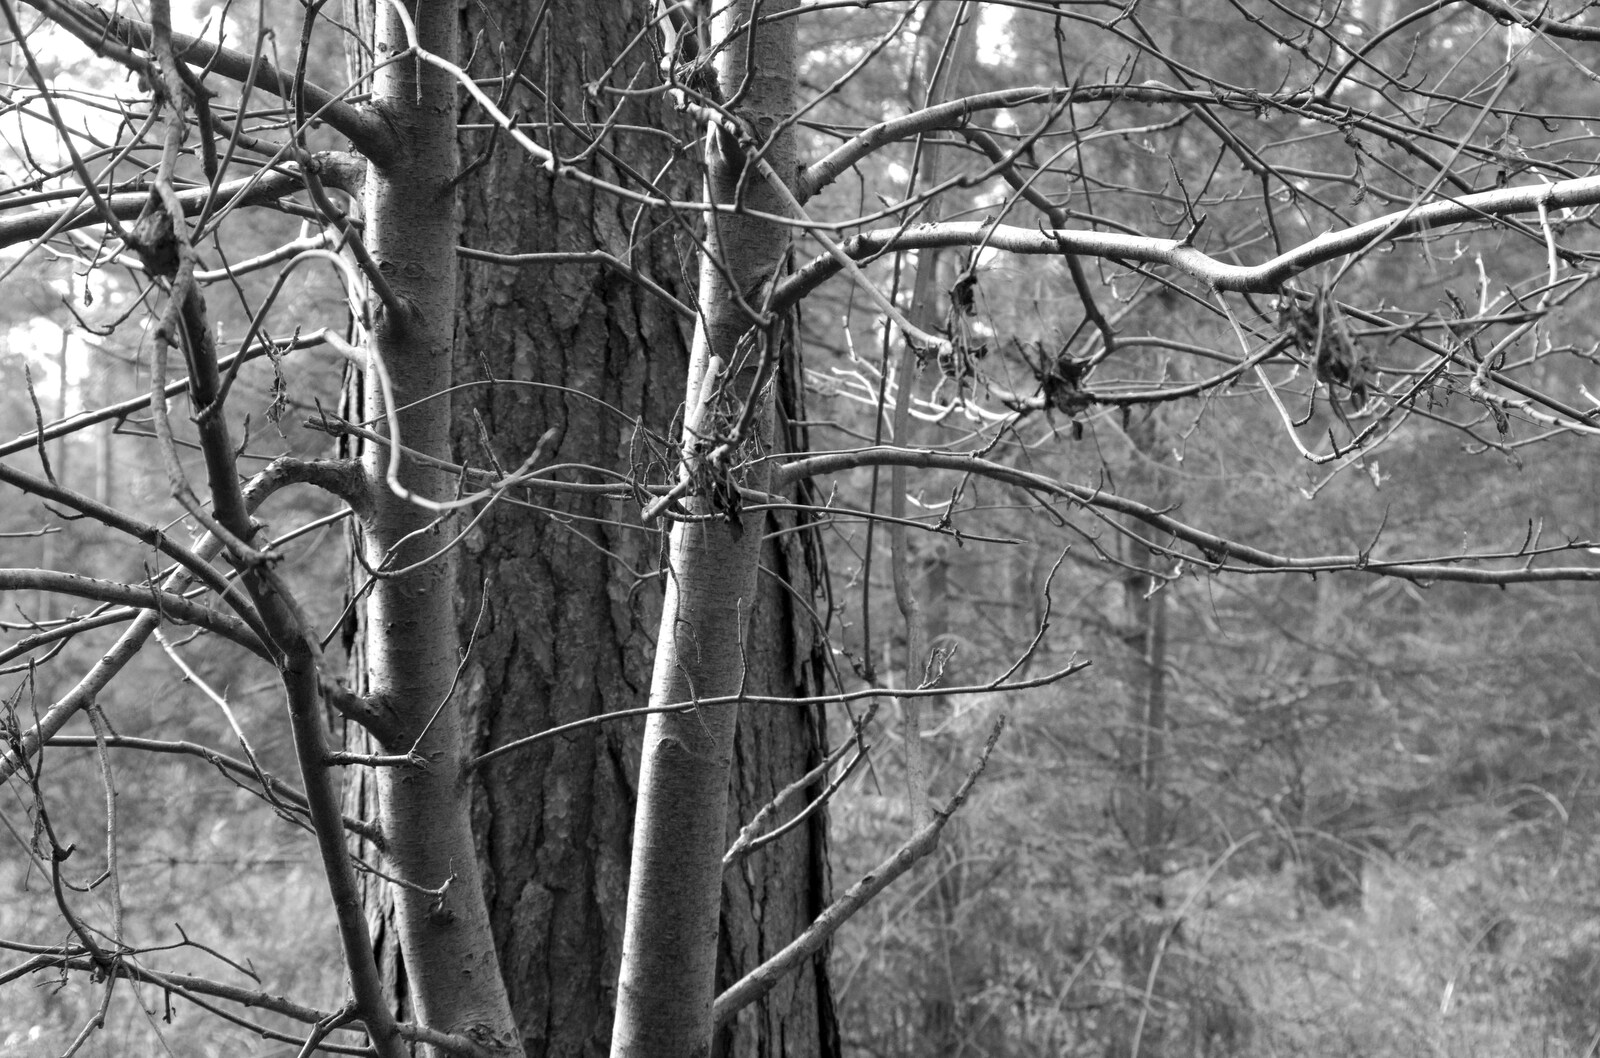 Black and white trees from A Trip to High Lodge, Brandon, Suffolk - 7th March 2020